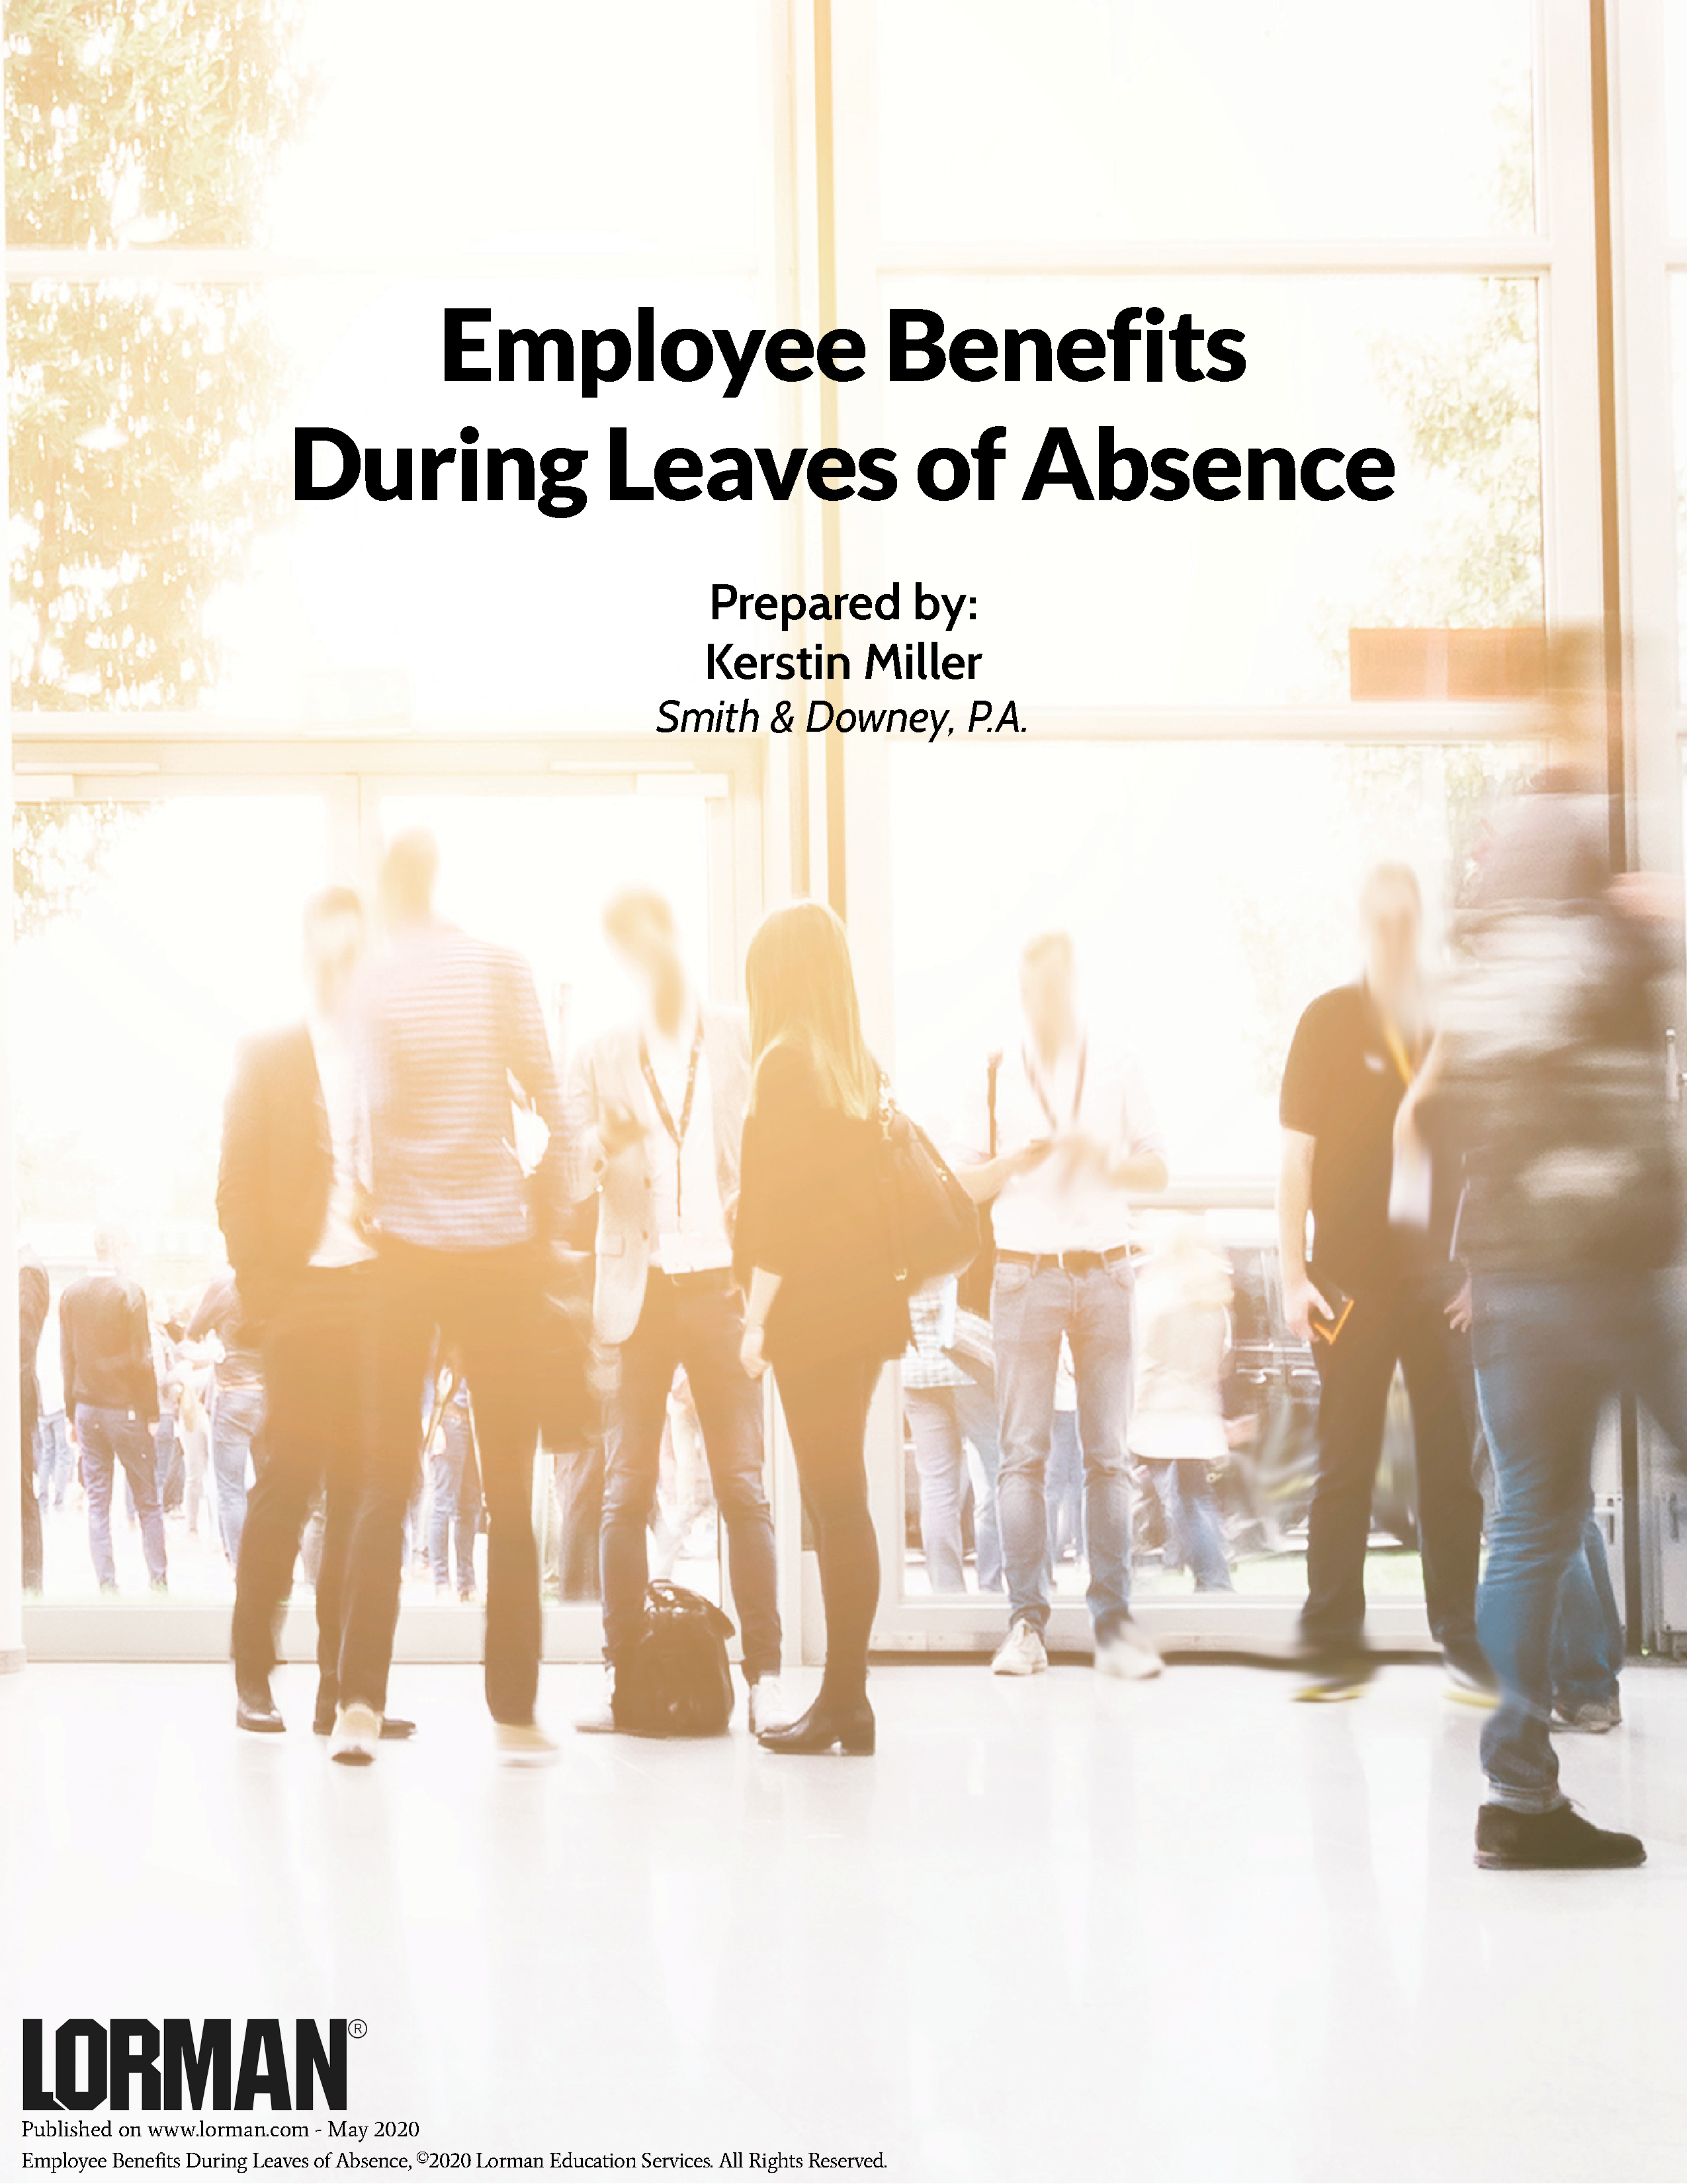 Employee Benefits During Leaves of Absence